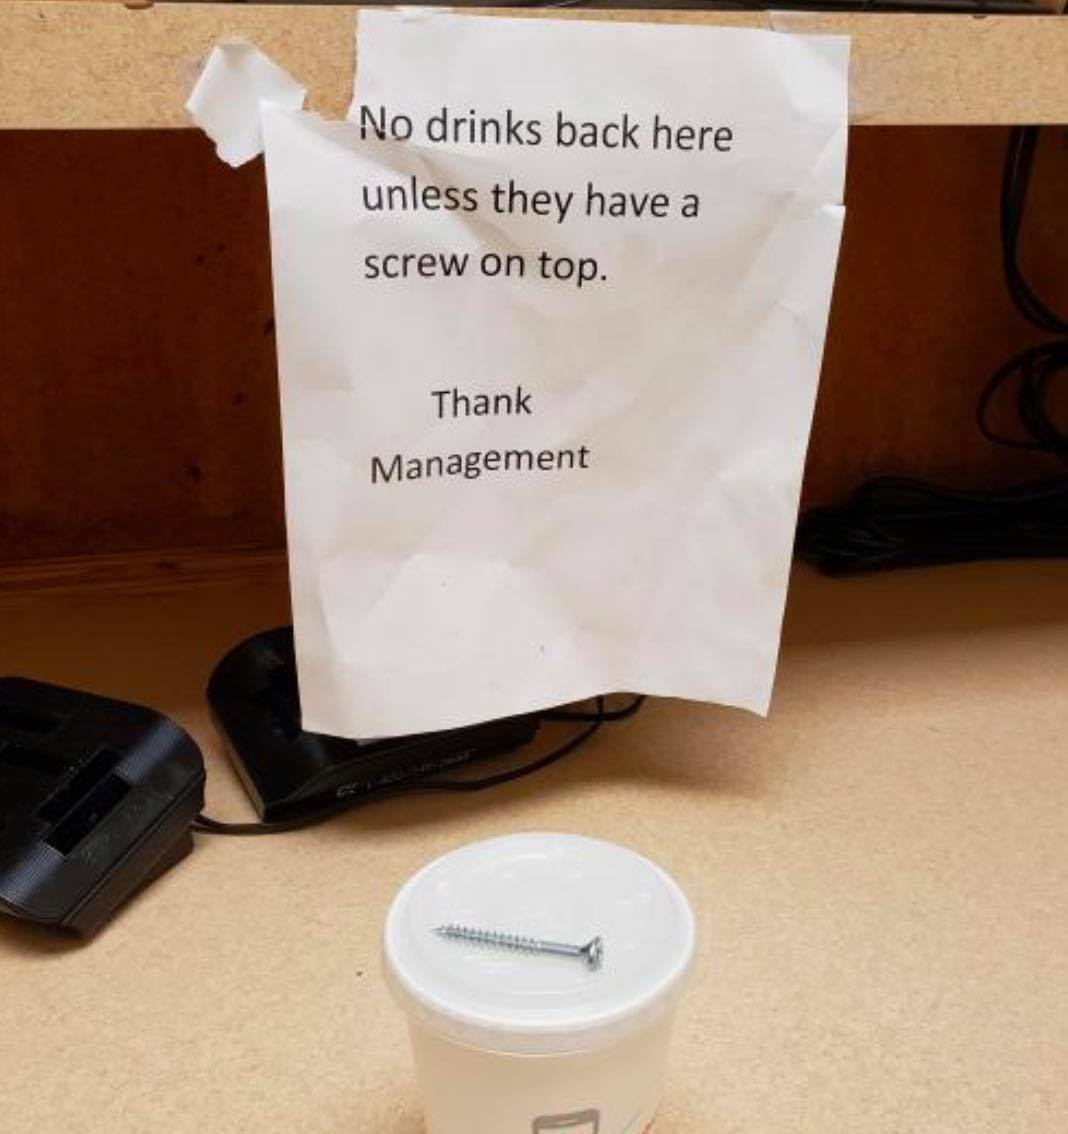 No drinks back here unless they have a screw on top. Thank Management